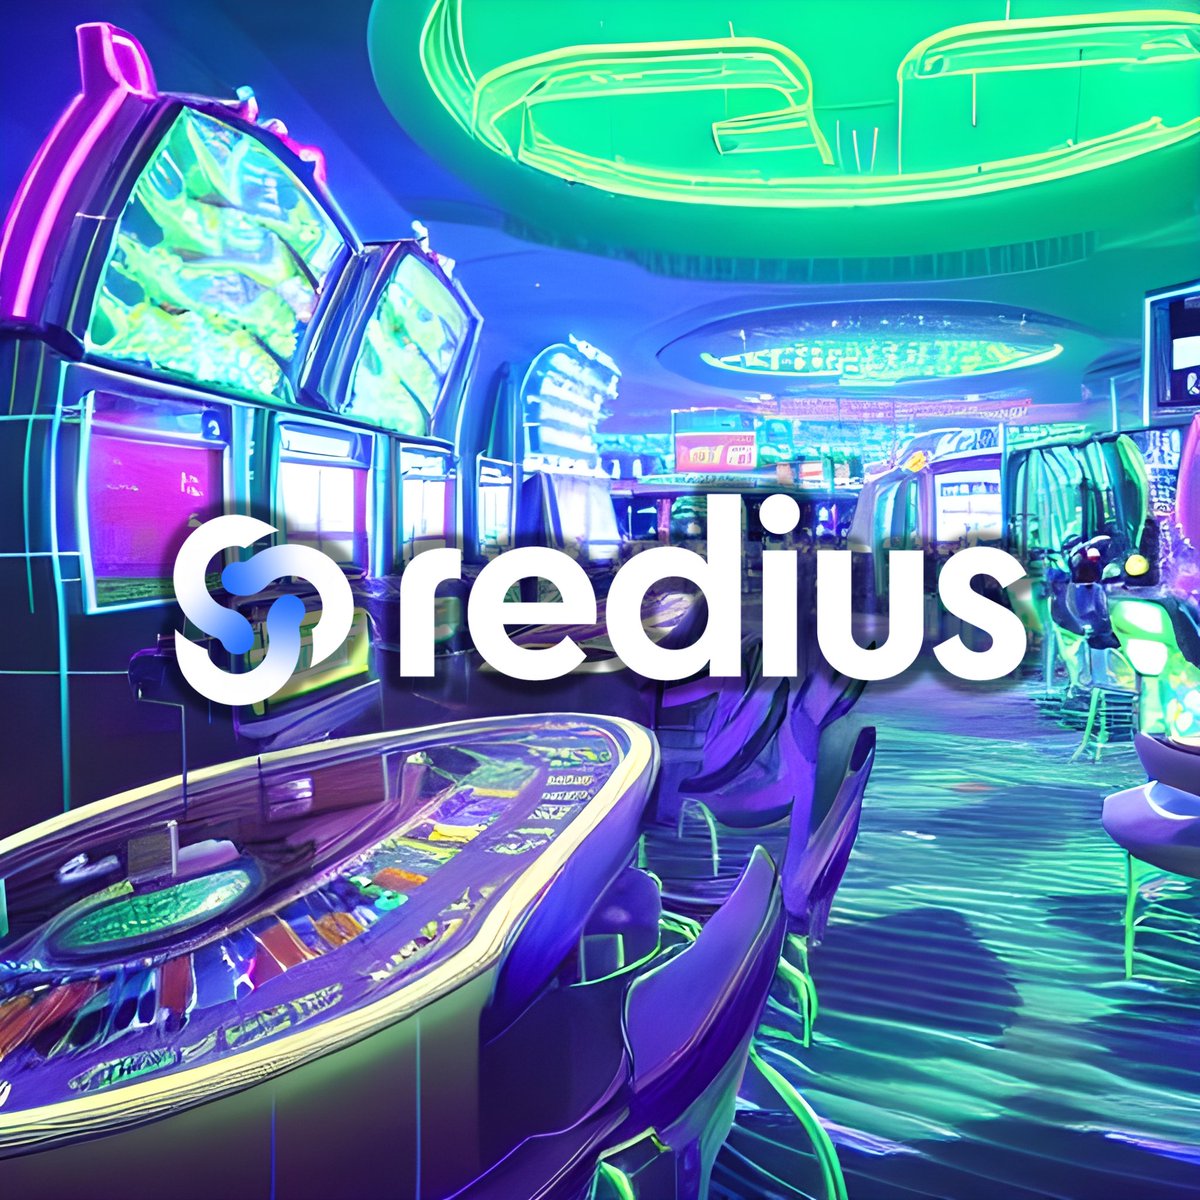 From casual games to high-stakes lotteries, Redius Network's one-stop destination has everything you need for Web3 entertainment 🎉🎉#web3casino #Redius #Play2Earn #OnlineCasino #Decentralization #Arbitrum